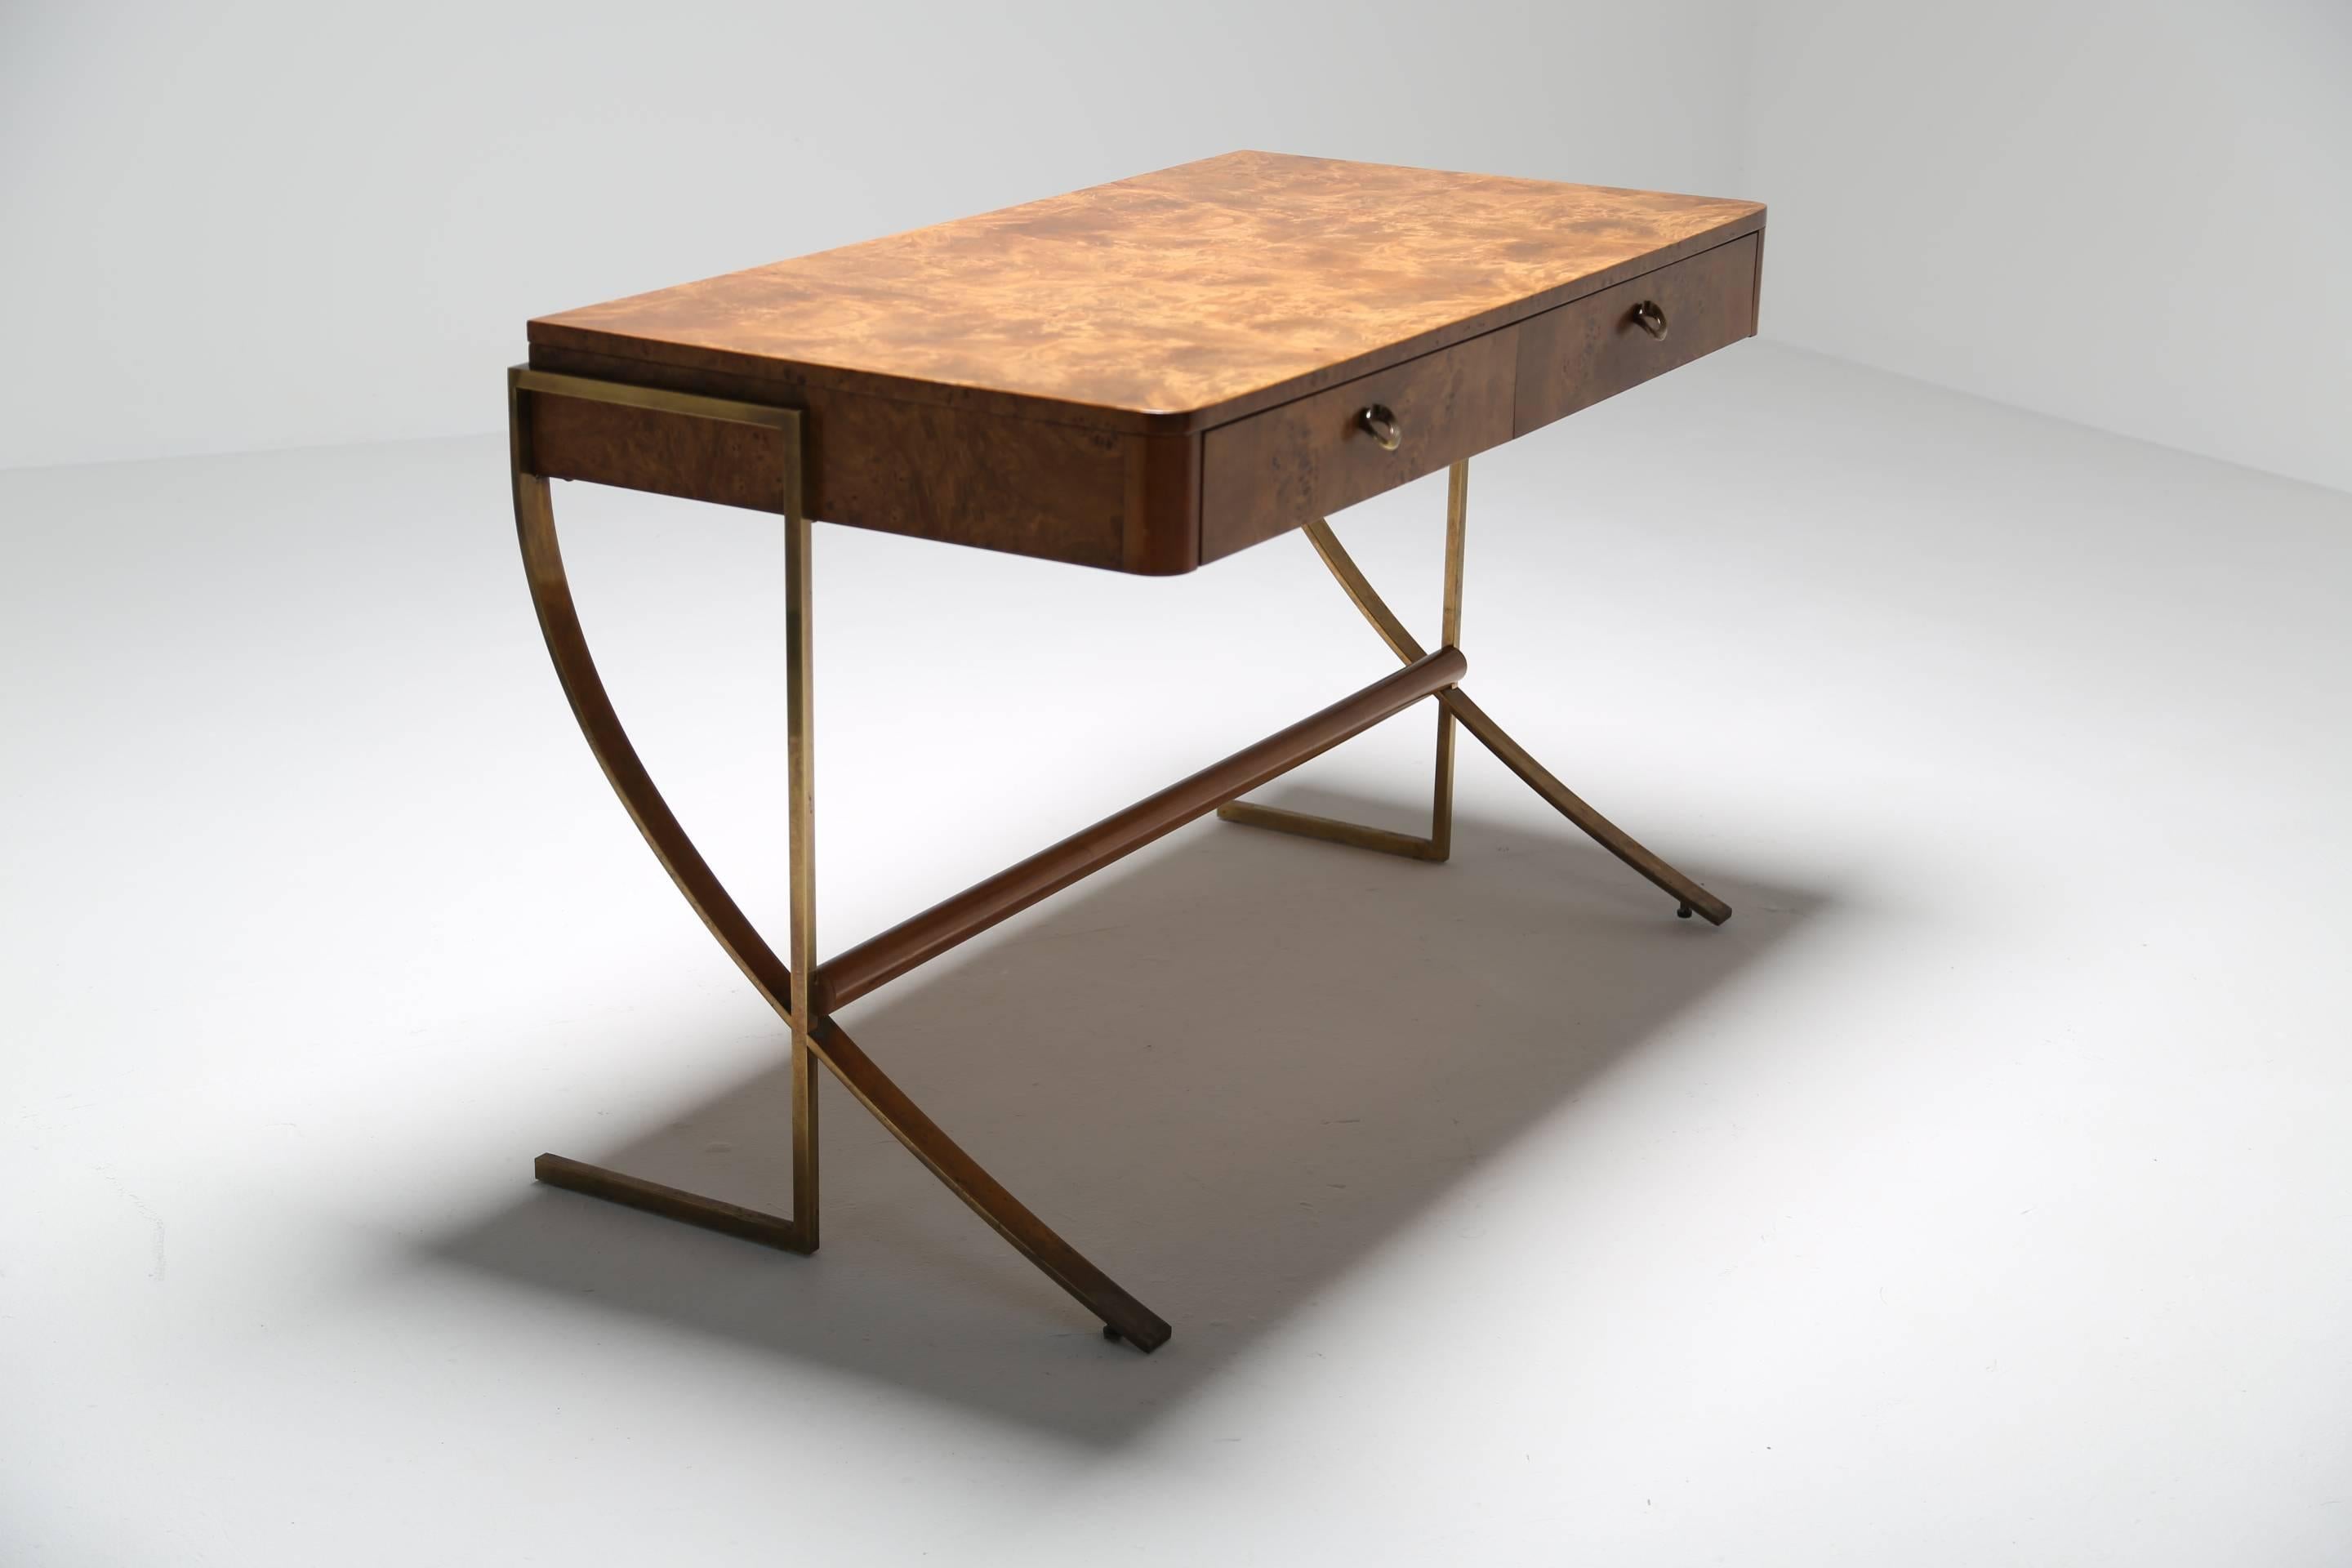 A beautiful burl wood and brass desk by Hickory White in the style of an Art Deco desk by Rene Herbst. A two-drawer letter writing or home office sized desk with sloping brass leg.